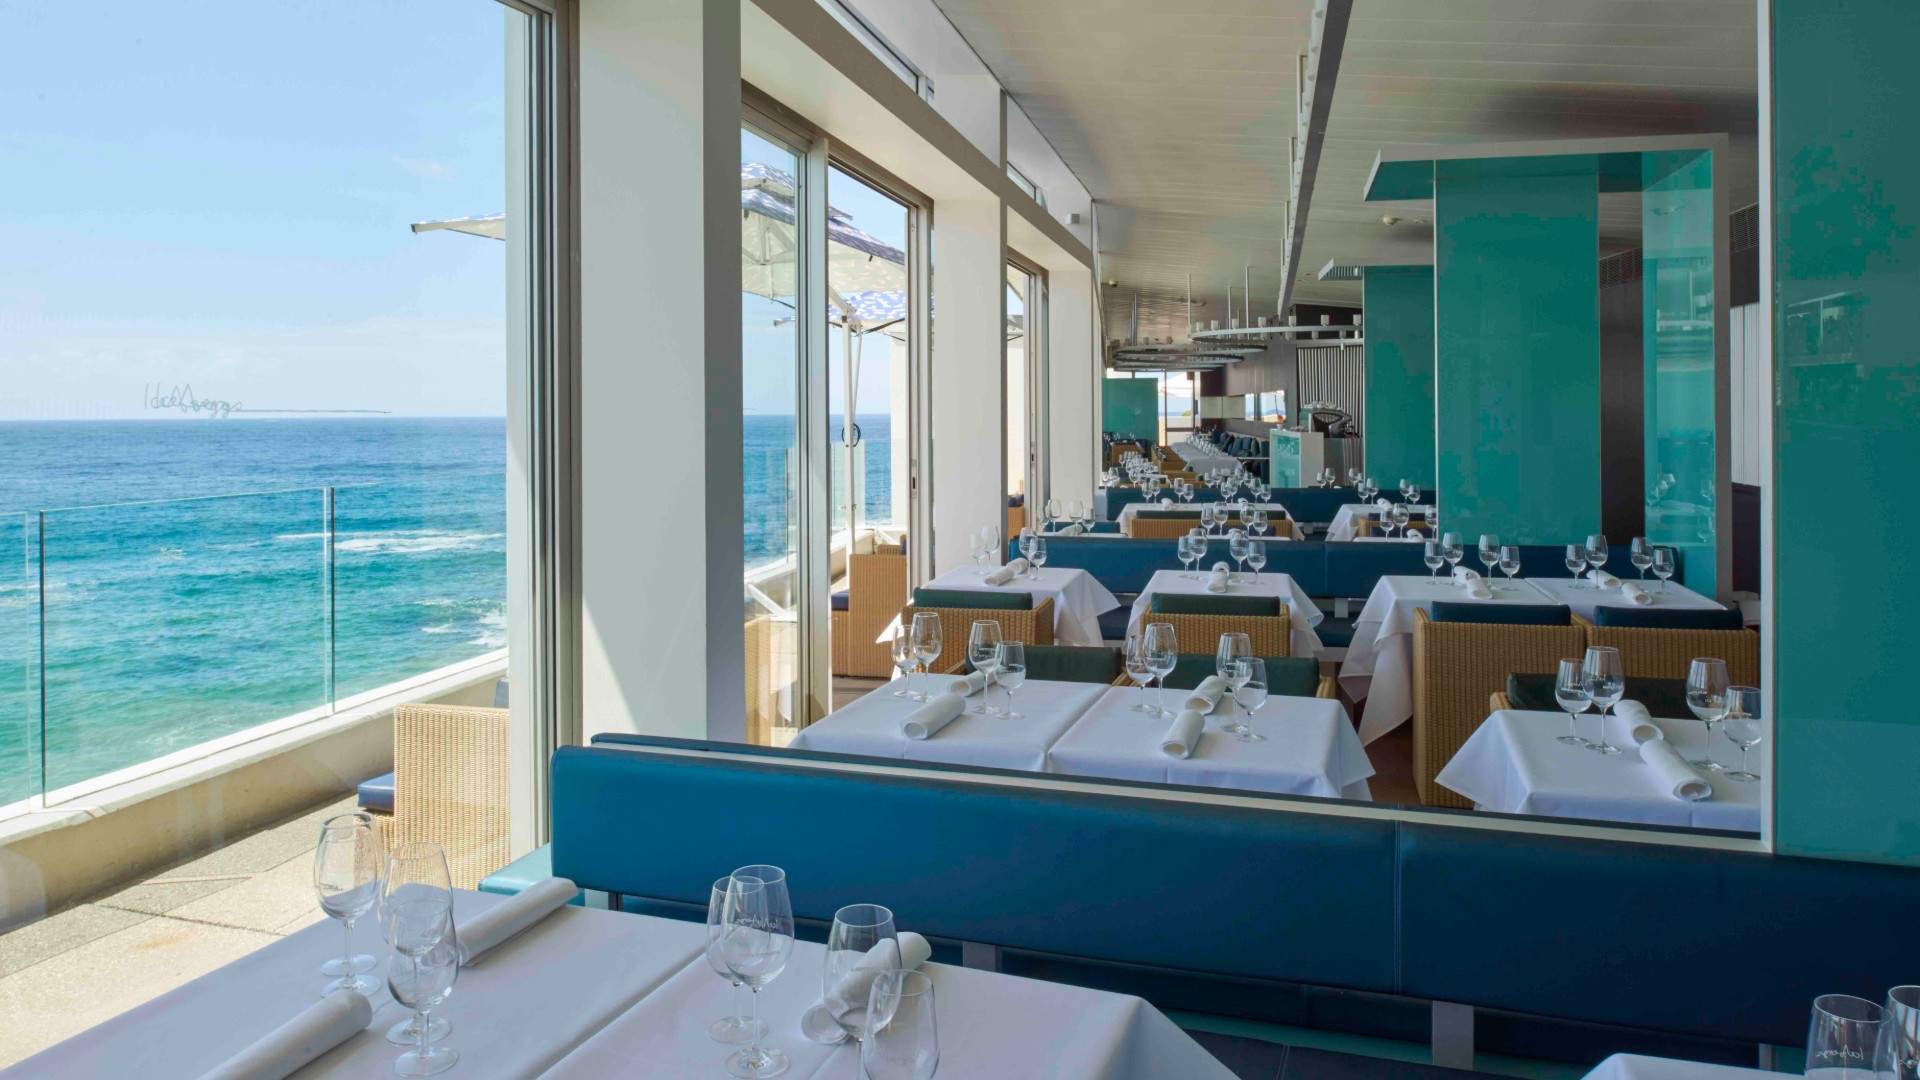 the dining room at Icebergs Dining Room and Bar in Sydney's Bondi